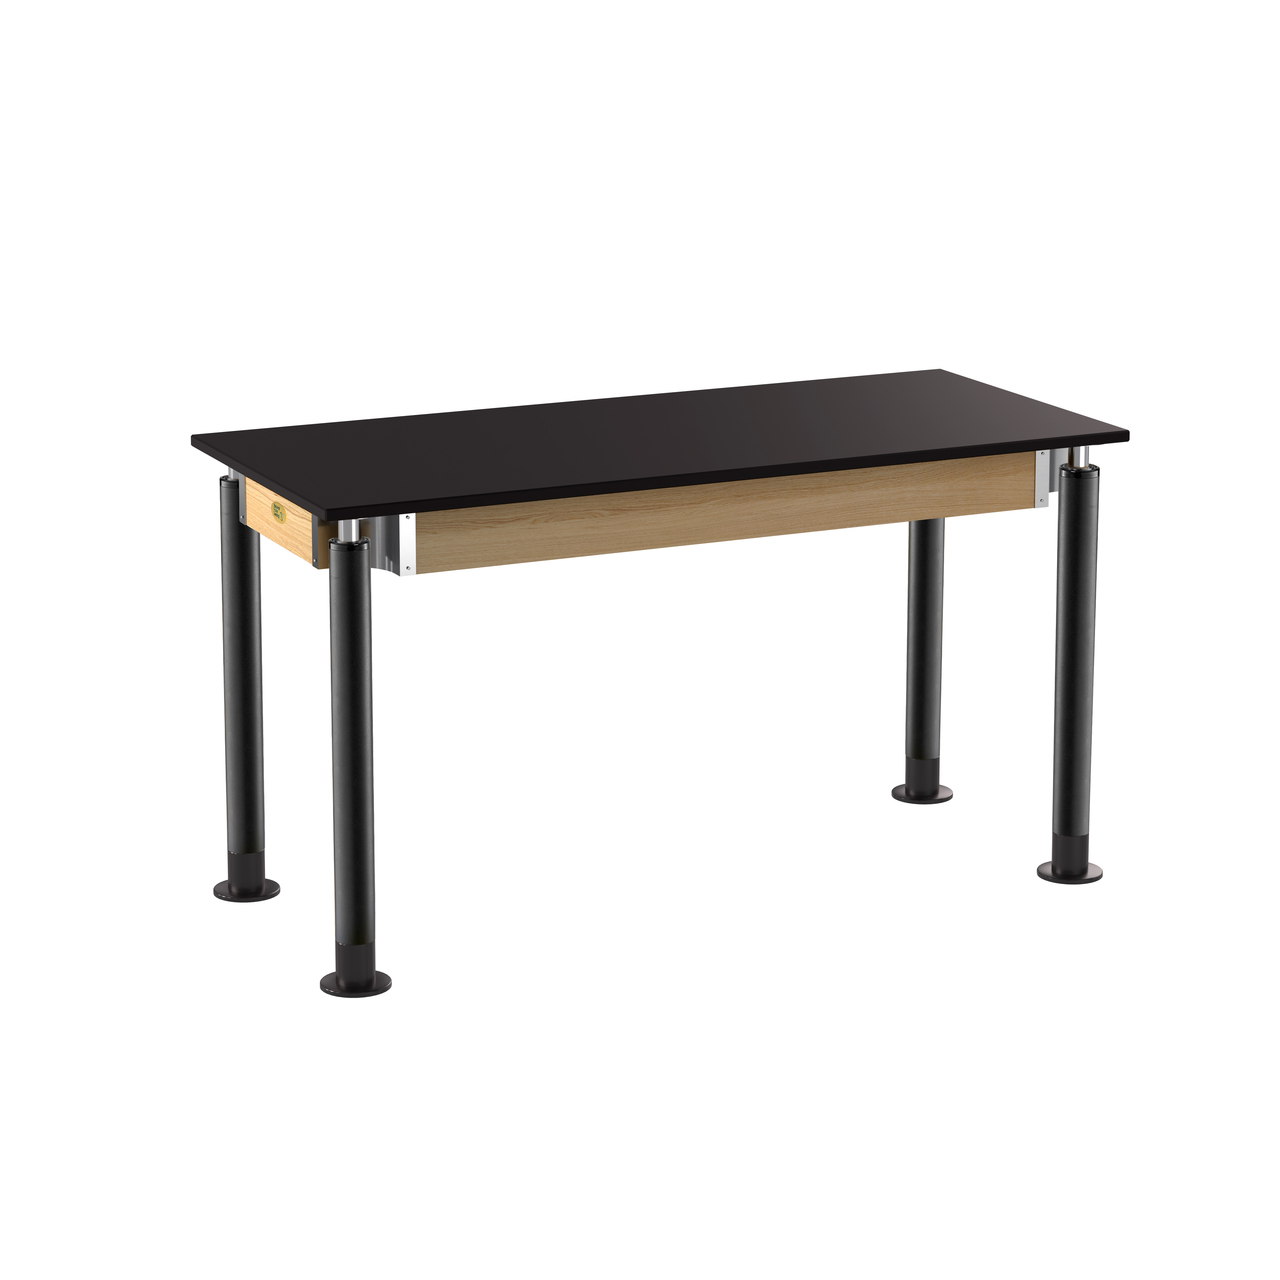 NPS Signature Science Lab Table, Black, 24"x54", Chemical Resistant Top - Black Top and Black Leg